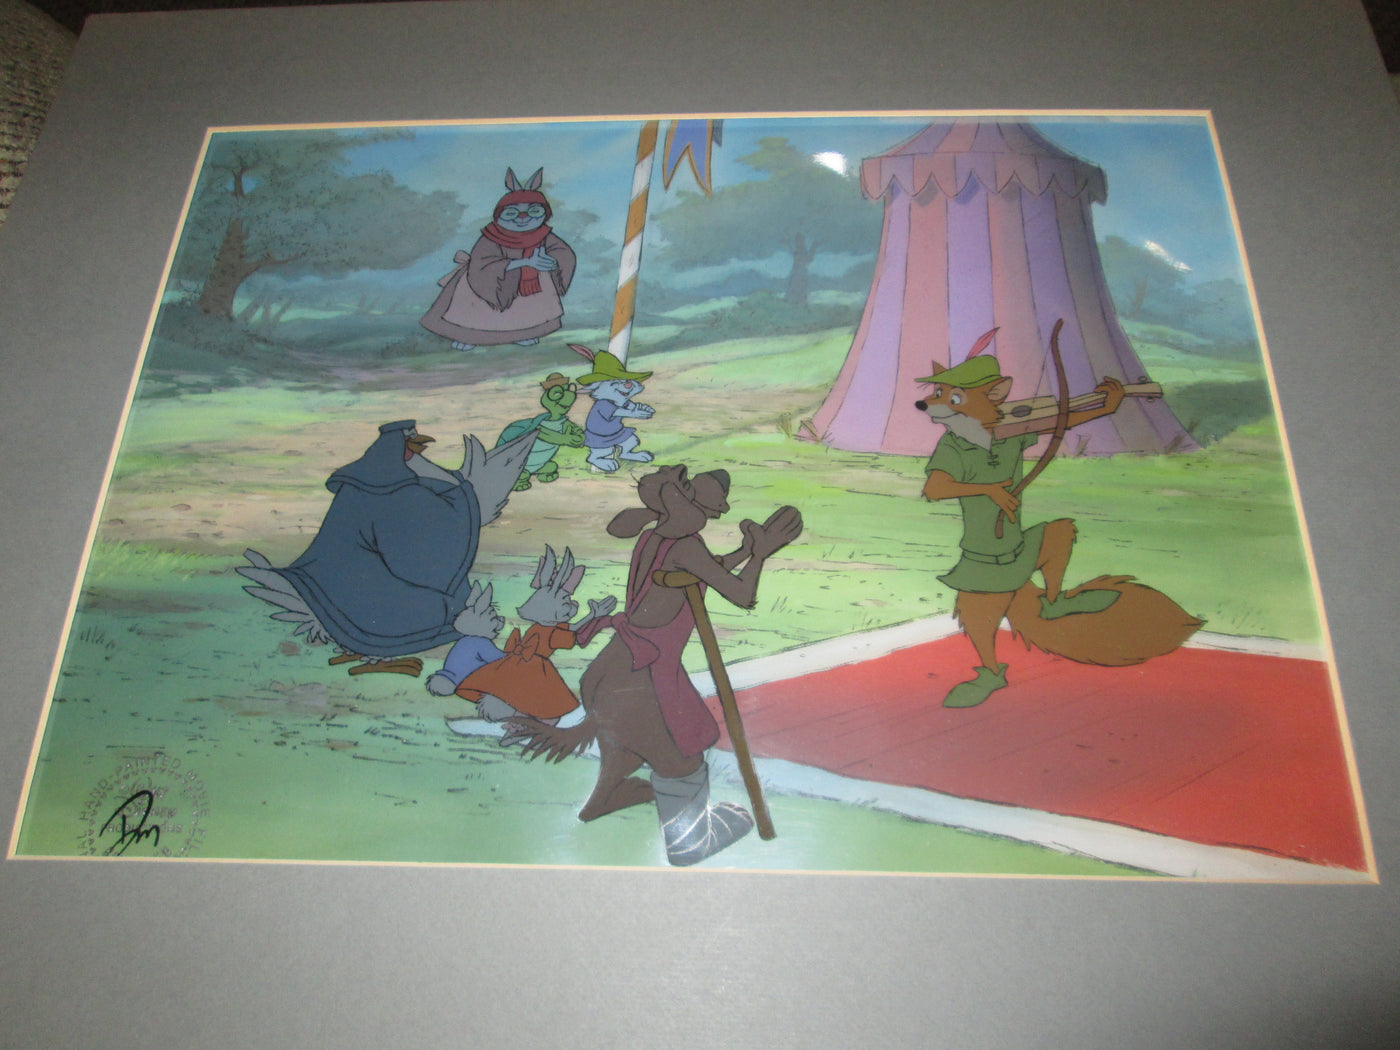 Original Disney Production Cel on Production Background from Robin Hood featuring Robin Hood, Otto, Sis, Tagalong, Lady Kluck, Toby Turtle, Skippy, and Mother Rabbit